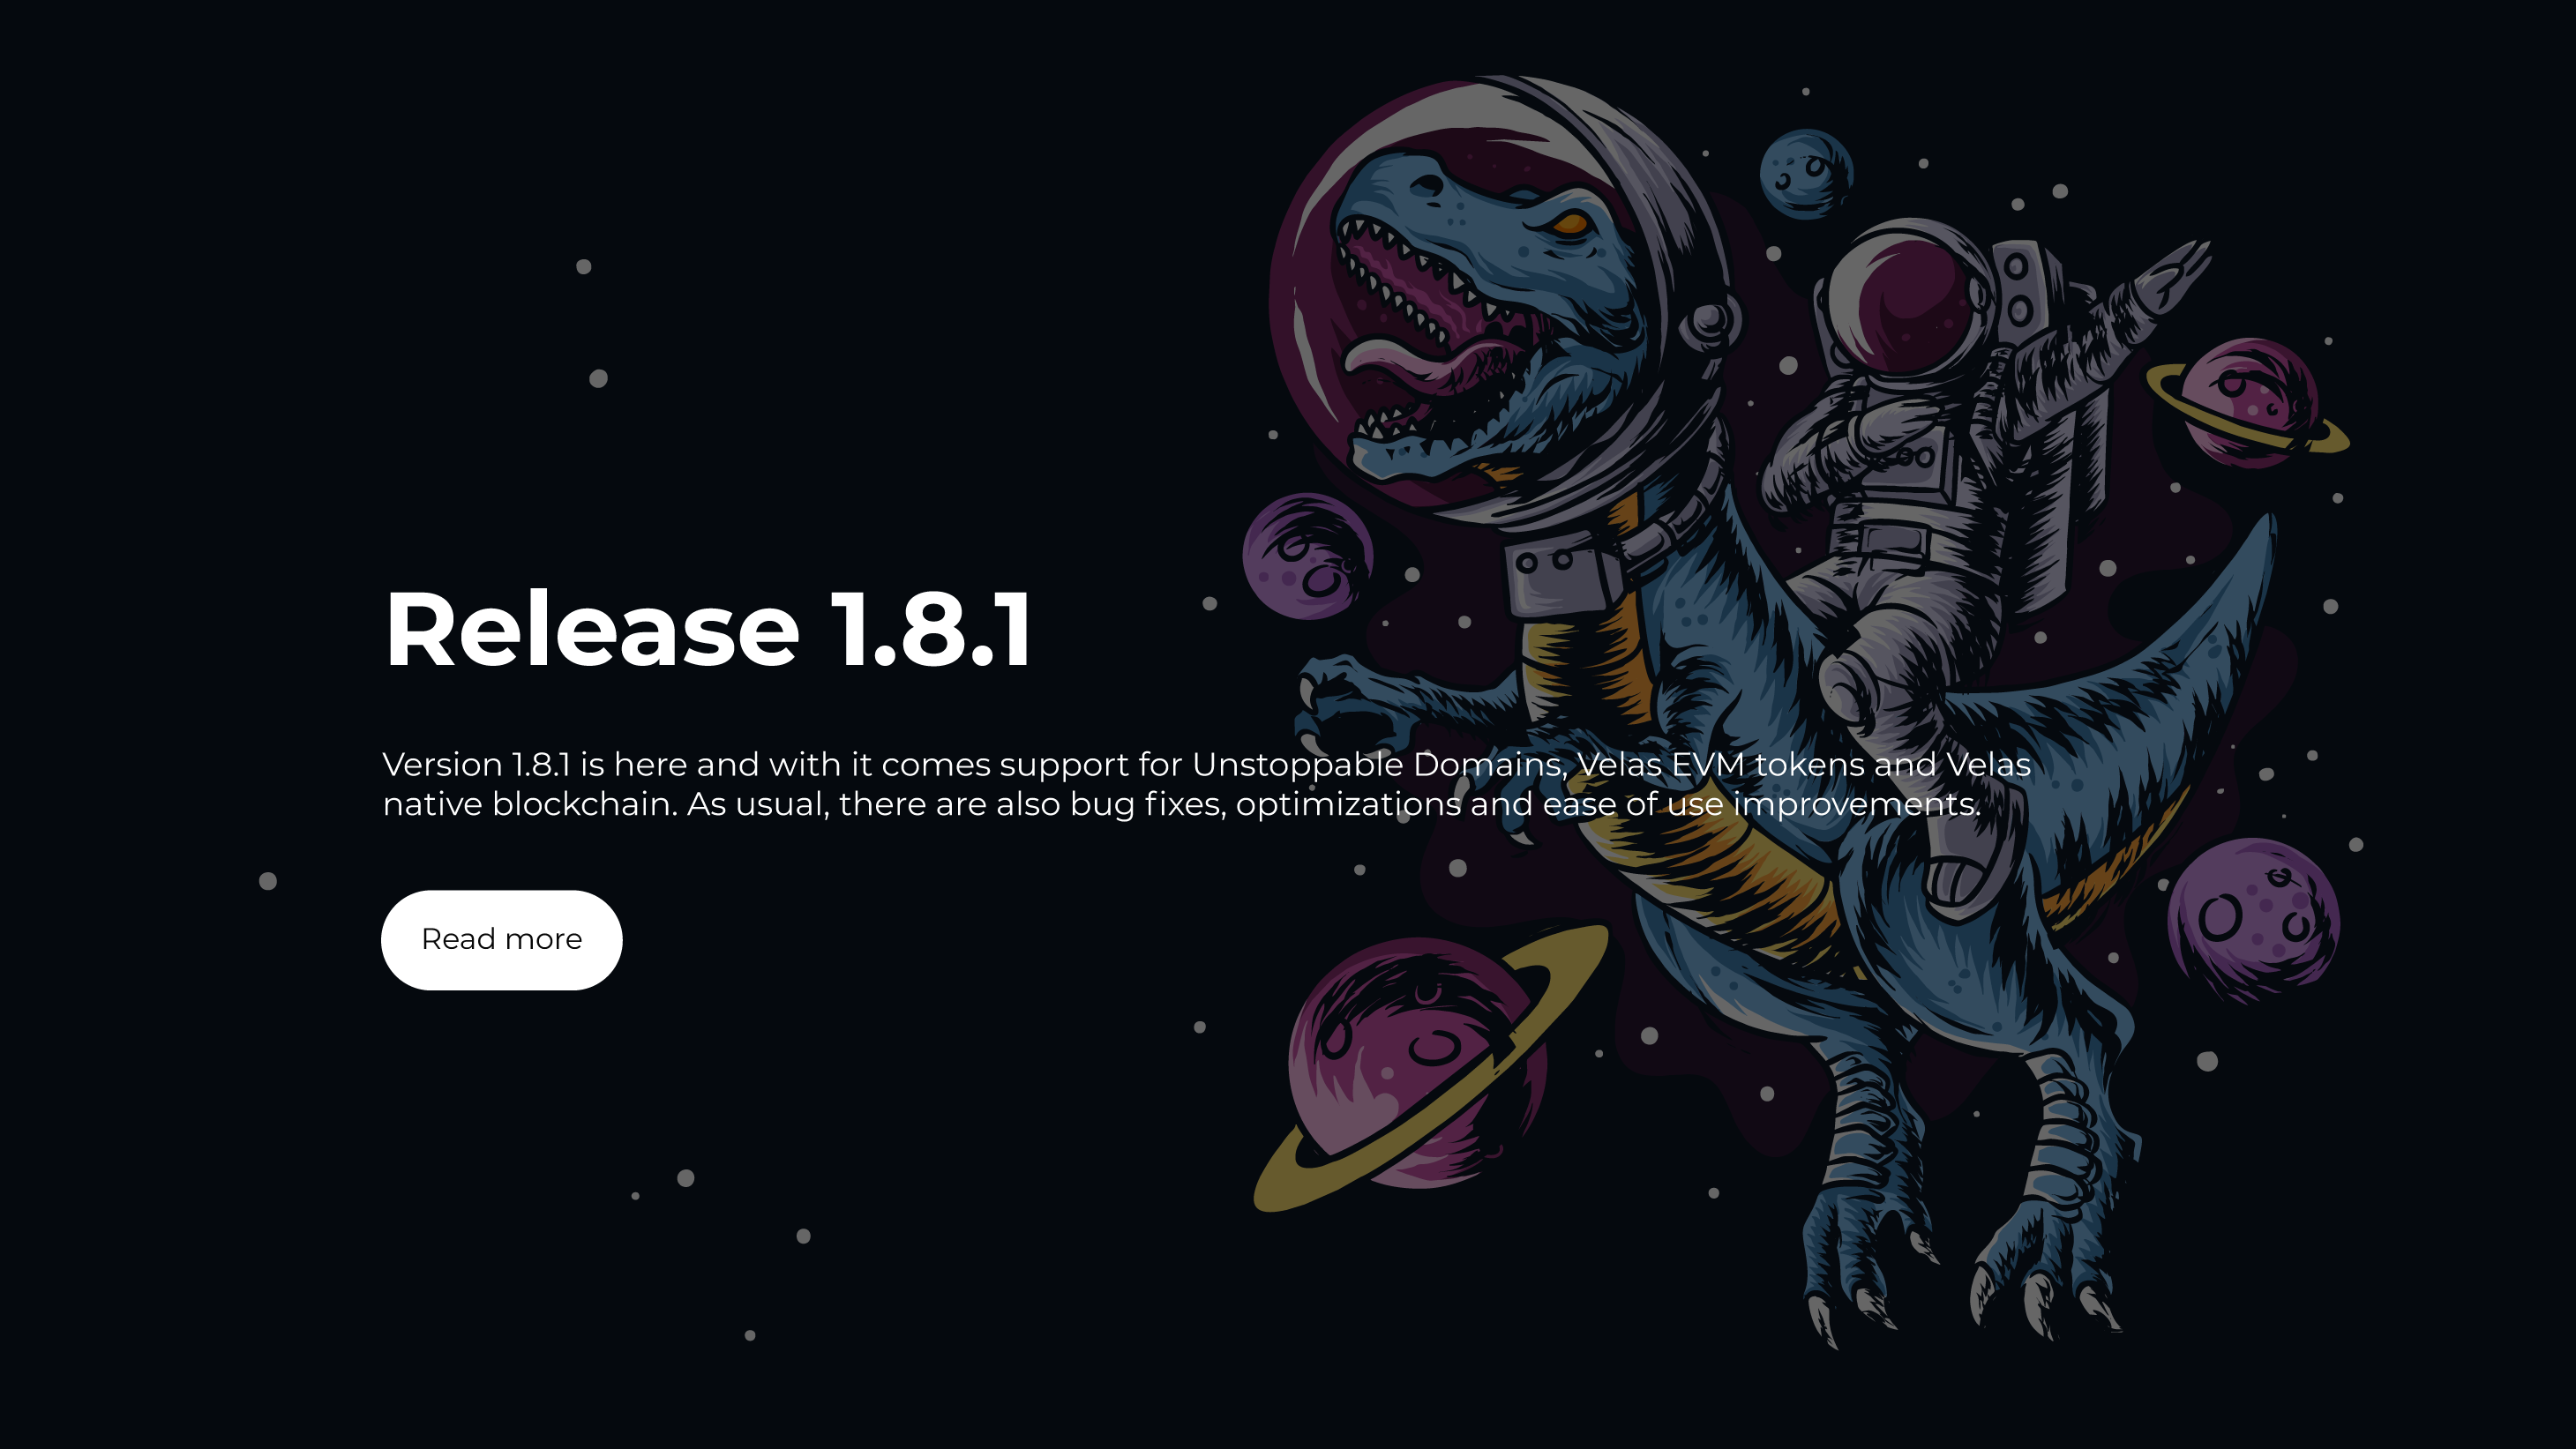 Release 1.8.1